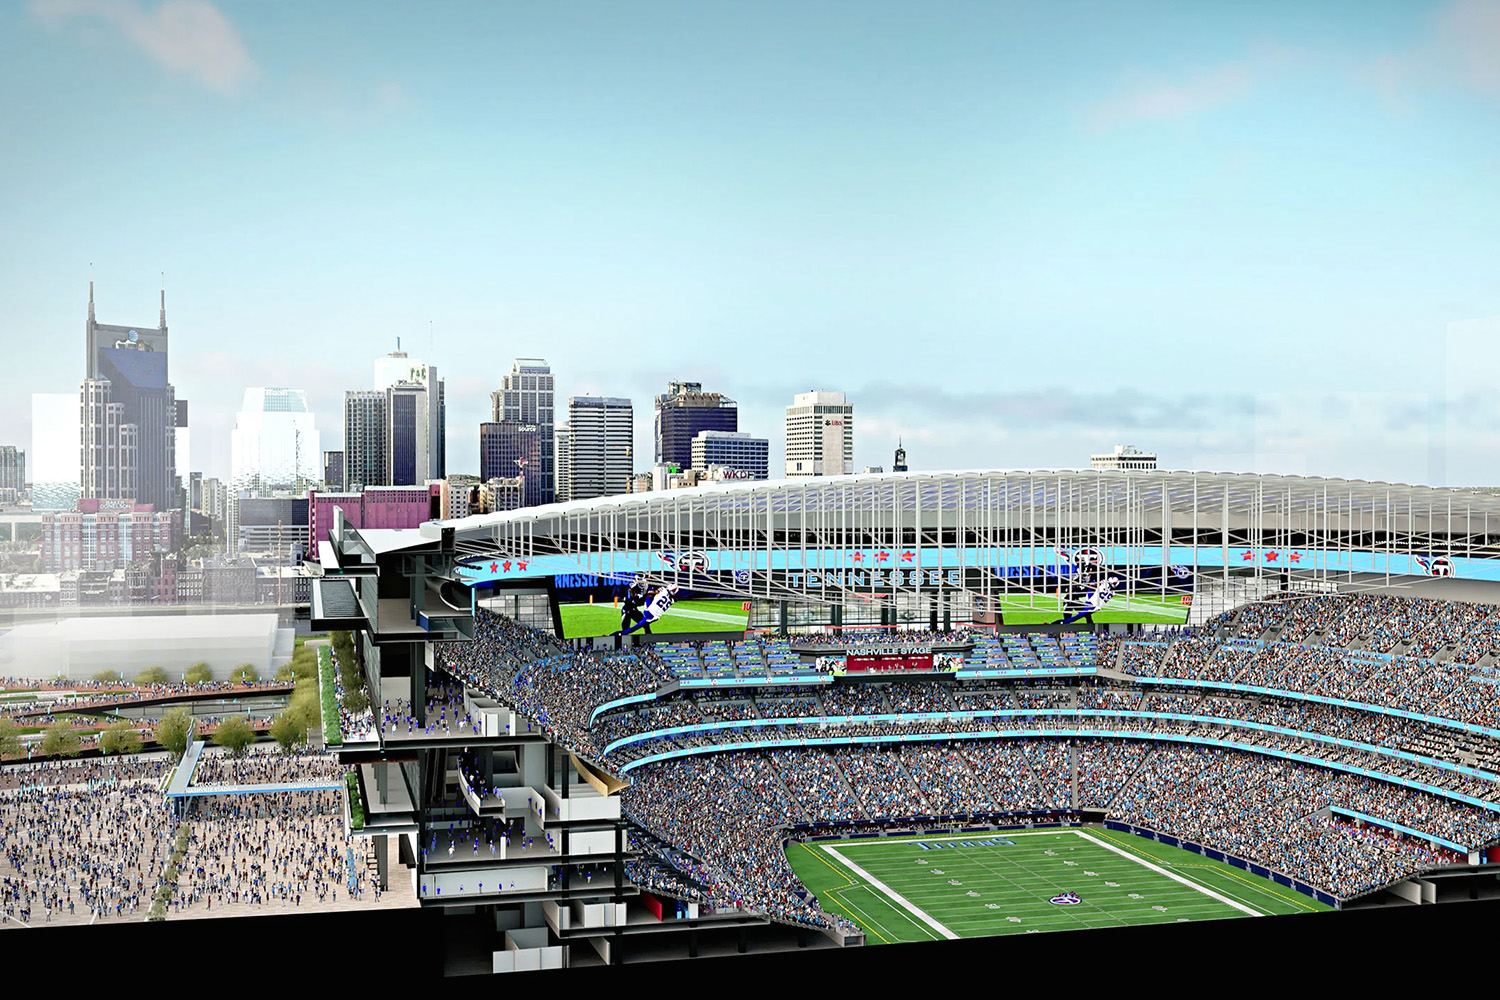 Artistic rendering of the new Tennessee Titans stadium in Nashville.